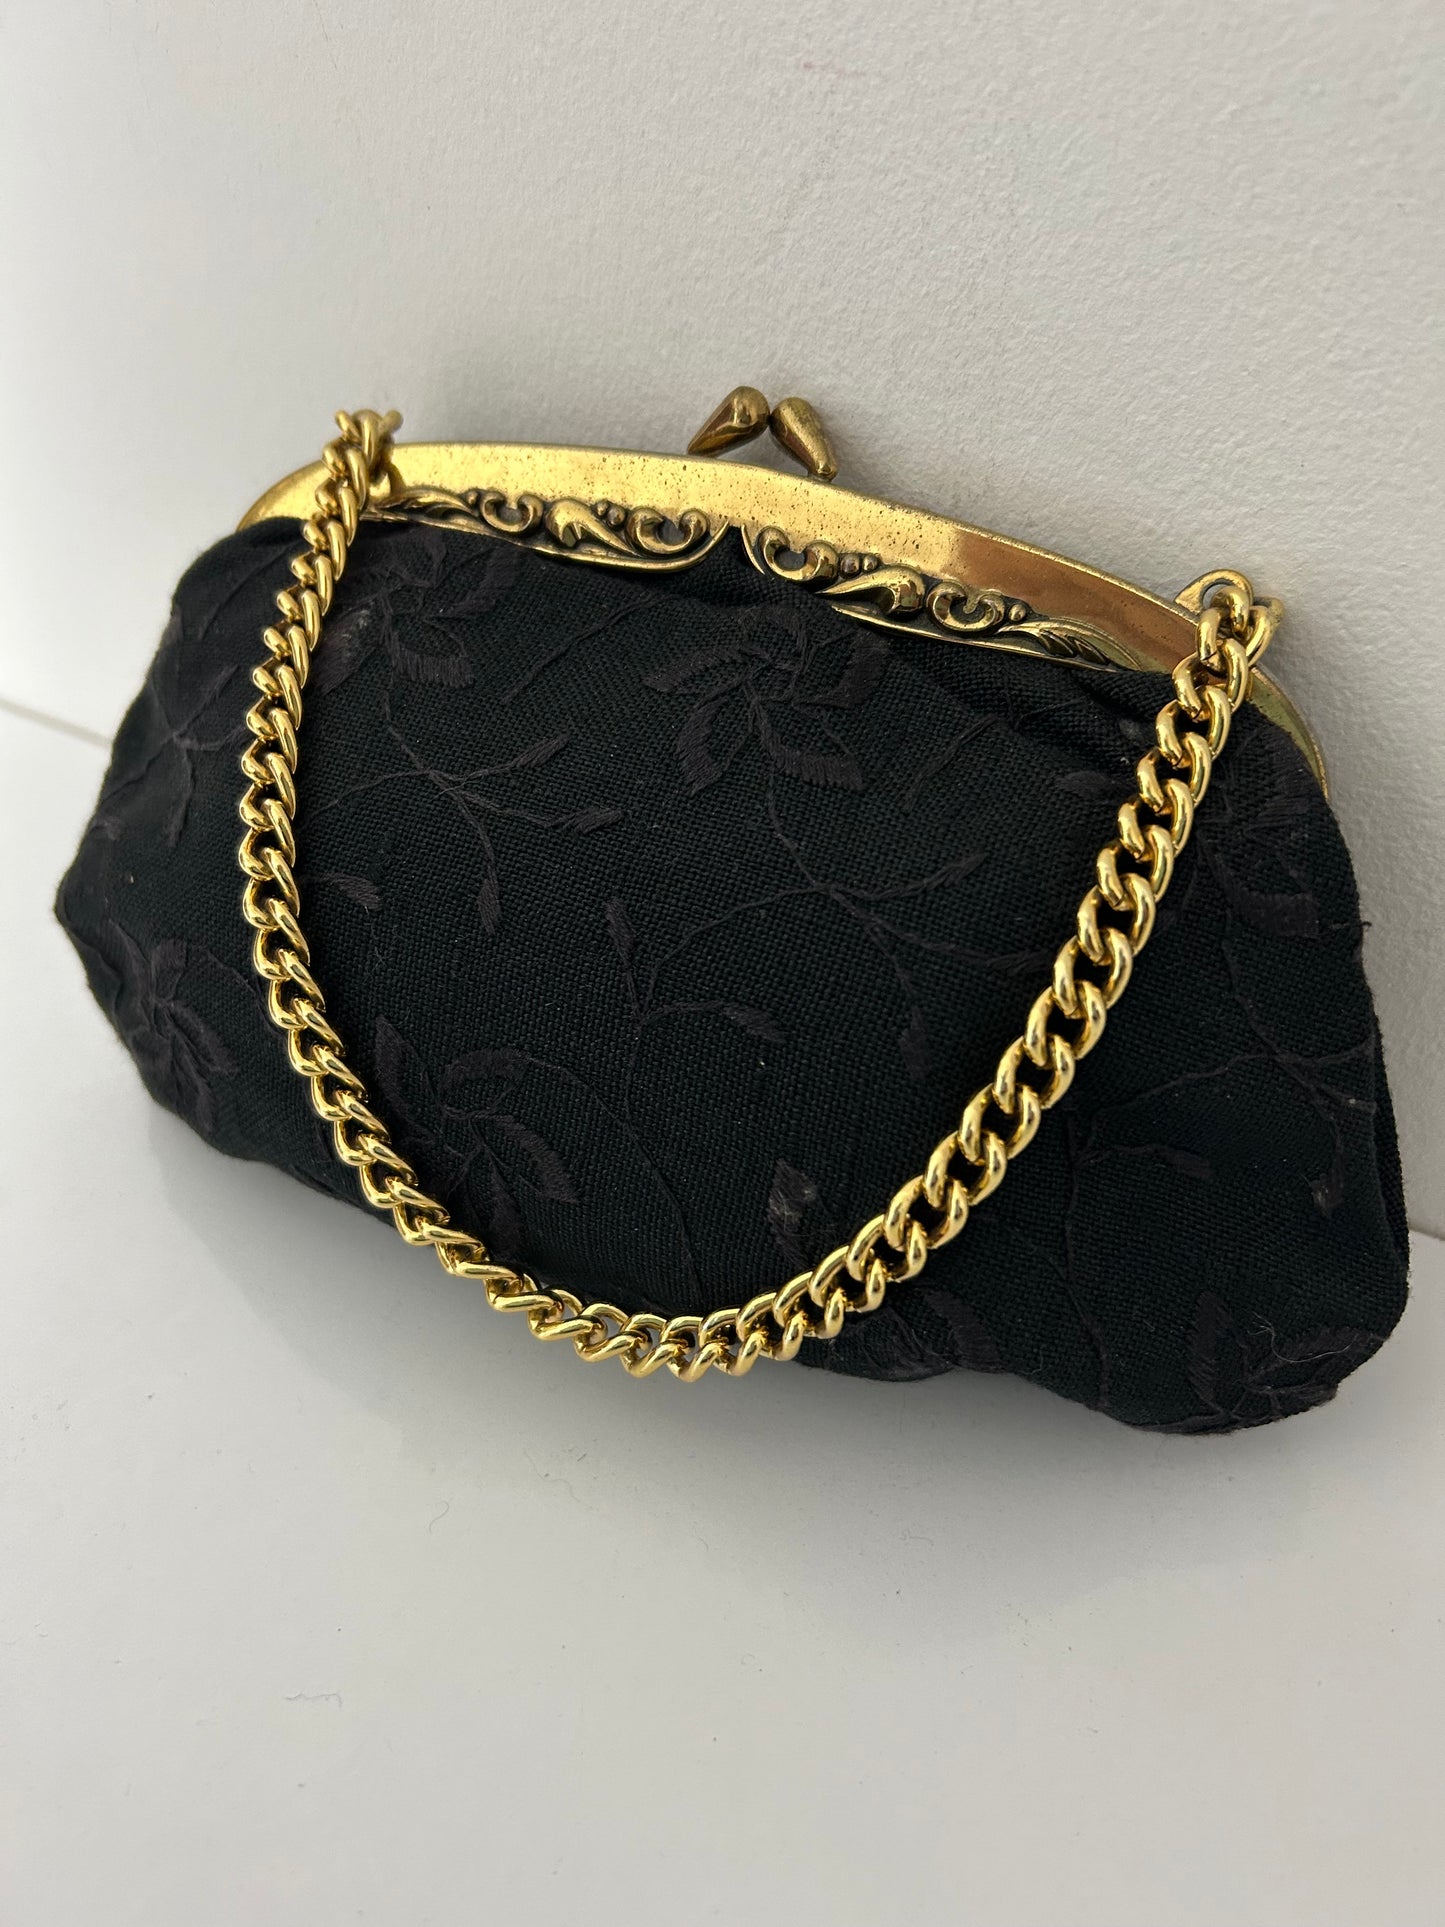 Vintage 1950s Small Black Embroidered Fabric Evening Bag With Chain Handle